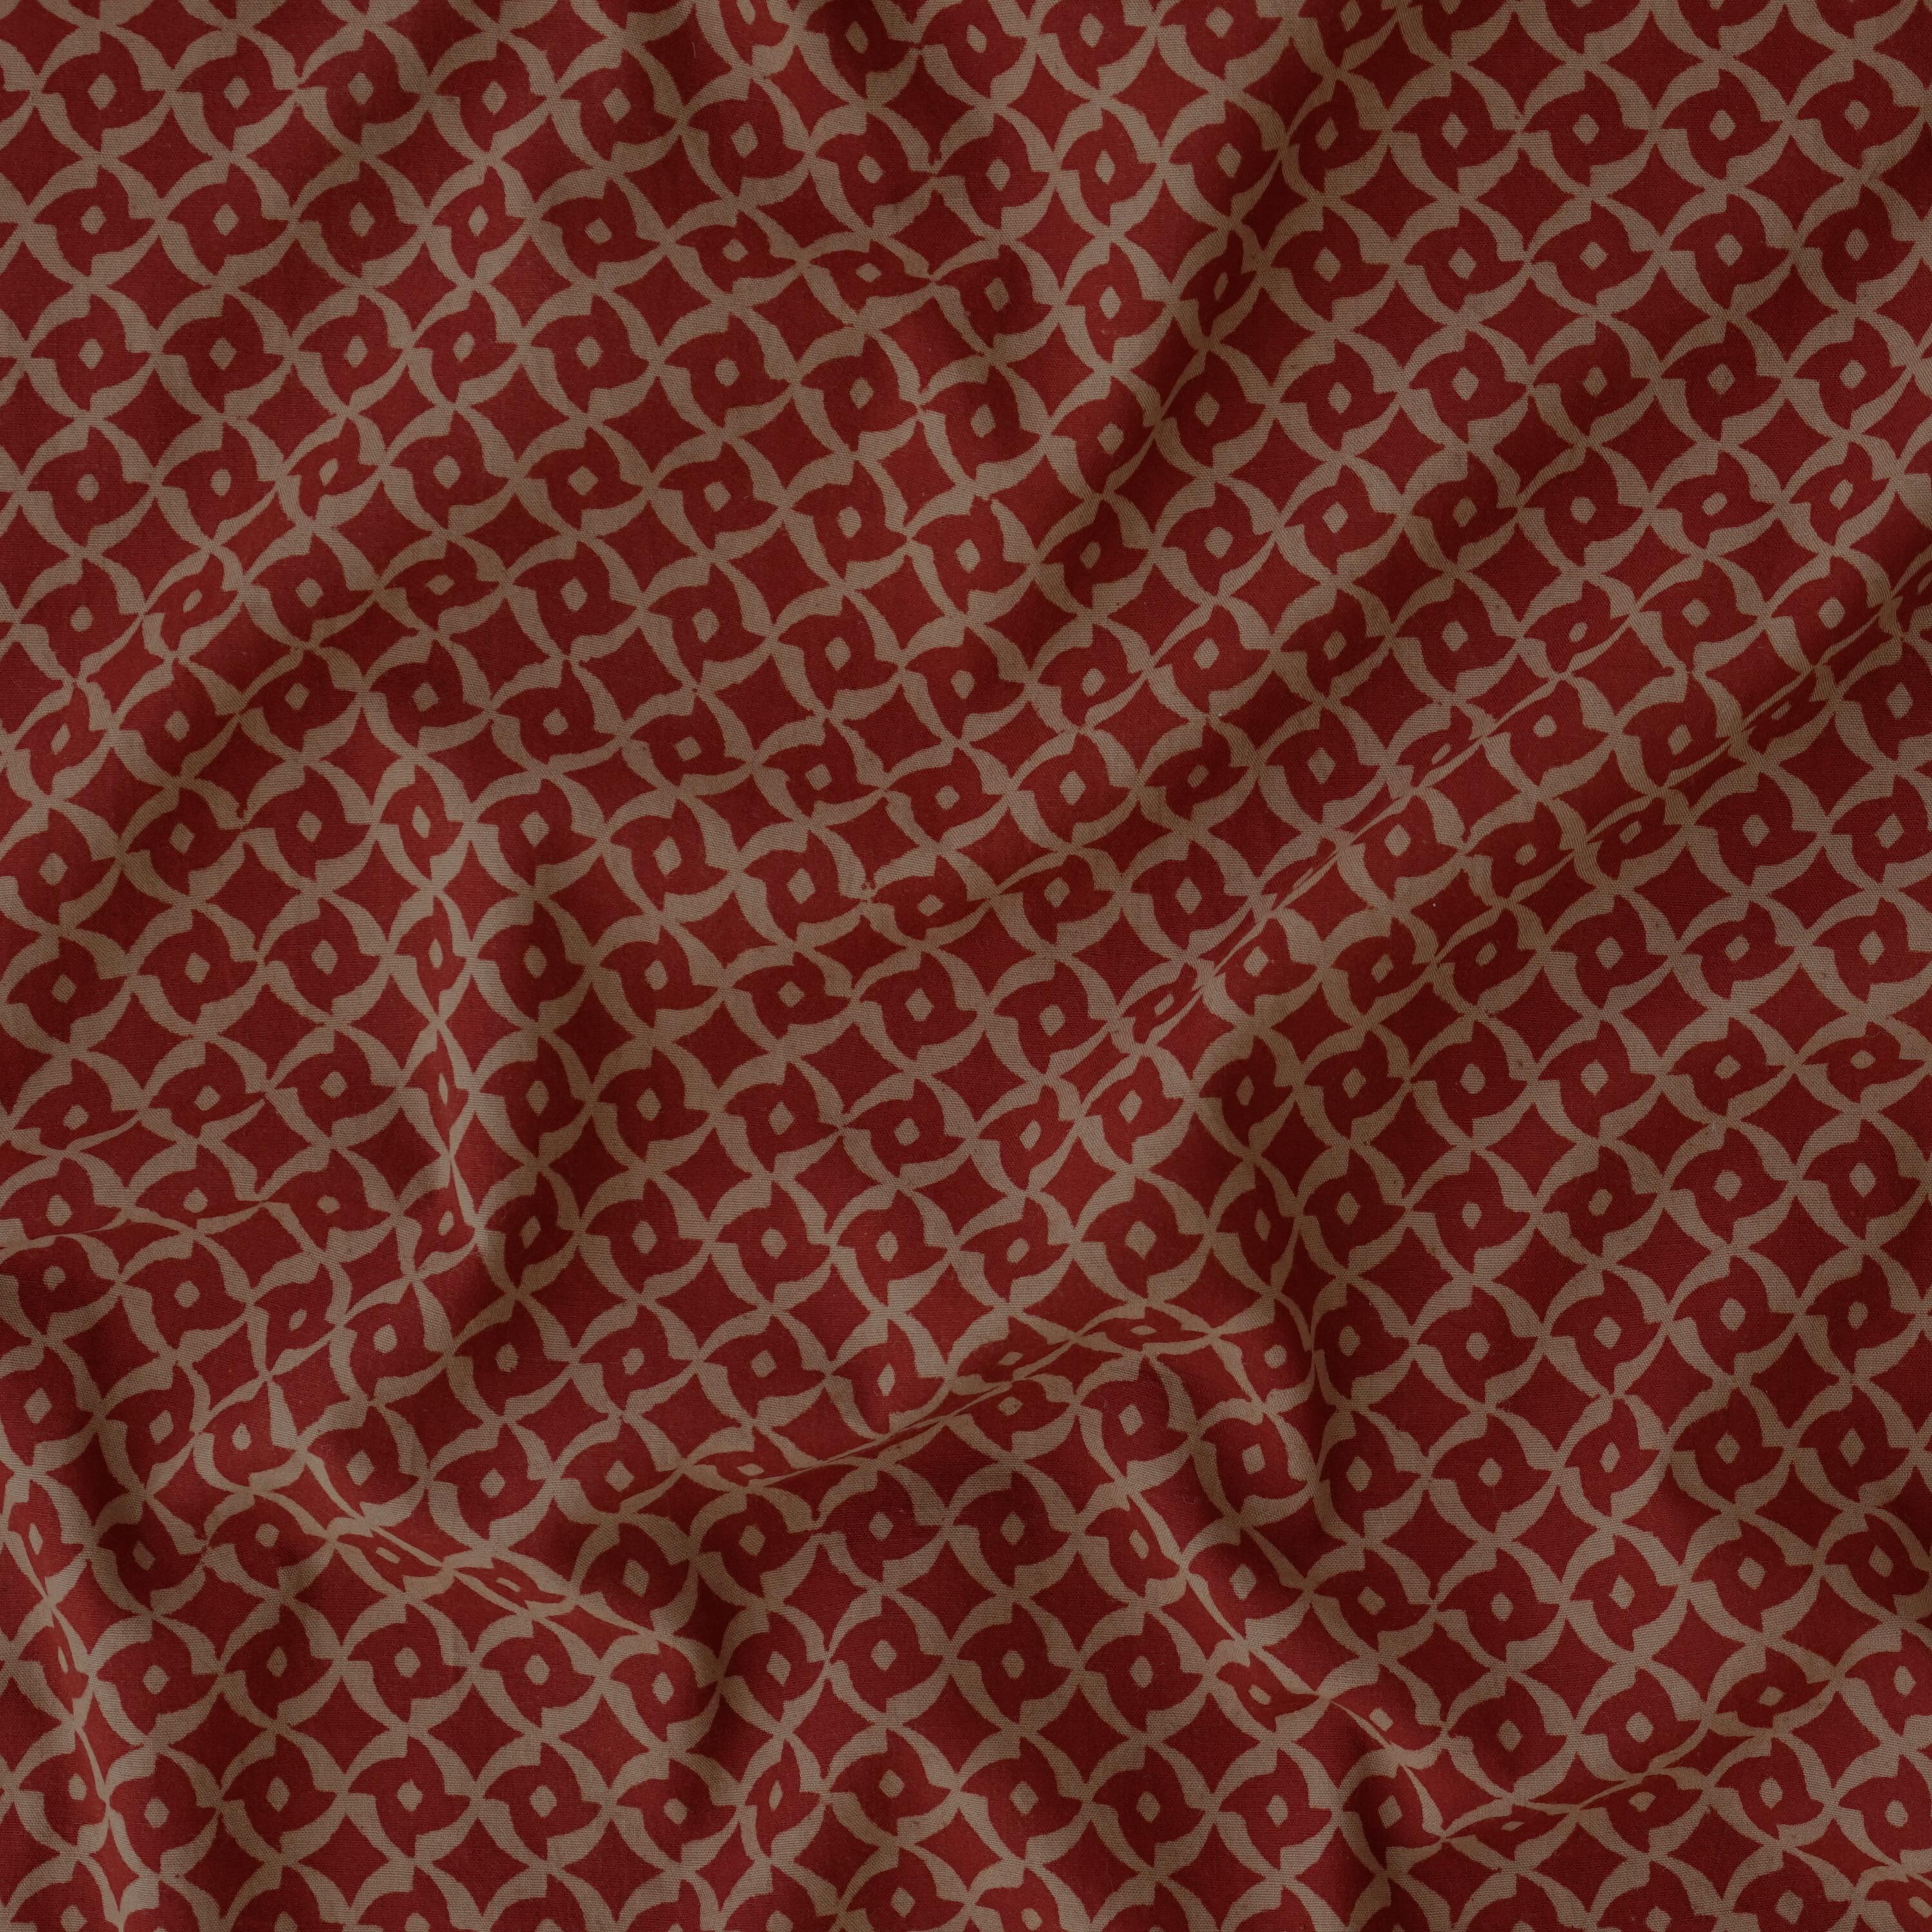 100% Block-Printed Cotton Fabric From India- Bagh - Alizarin Red & Indigosol Khaki - Wurfstern Origami Print - Contrast